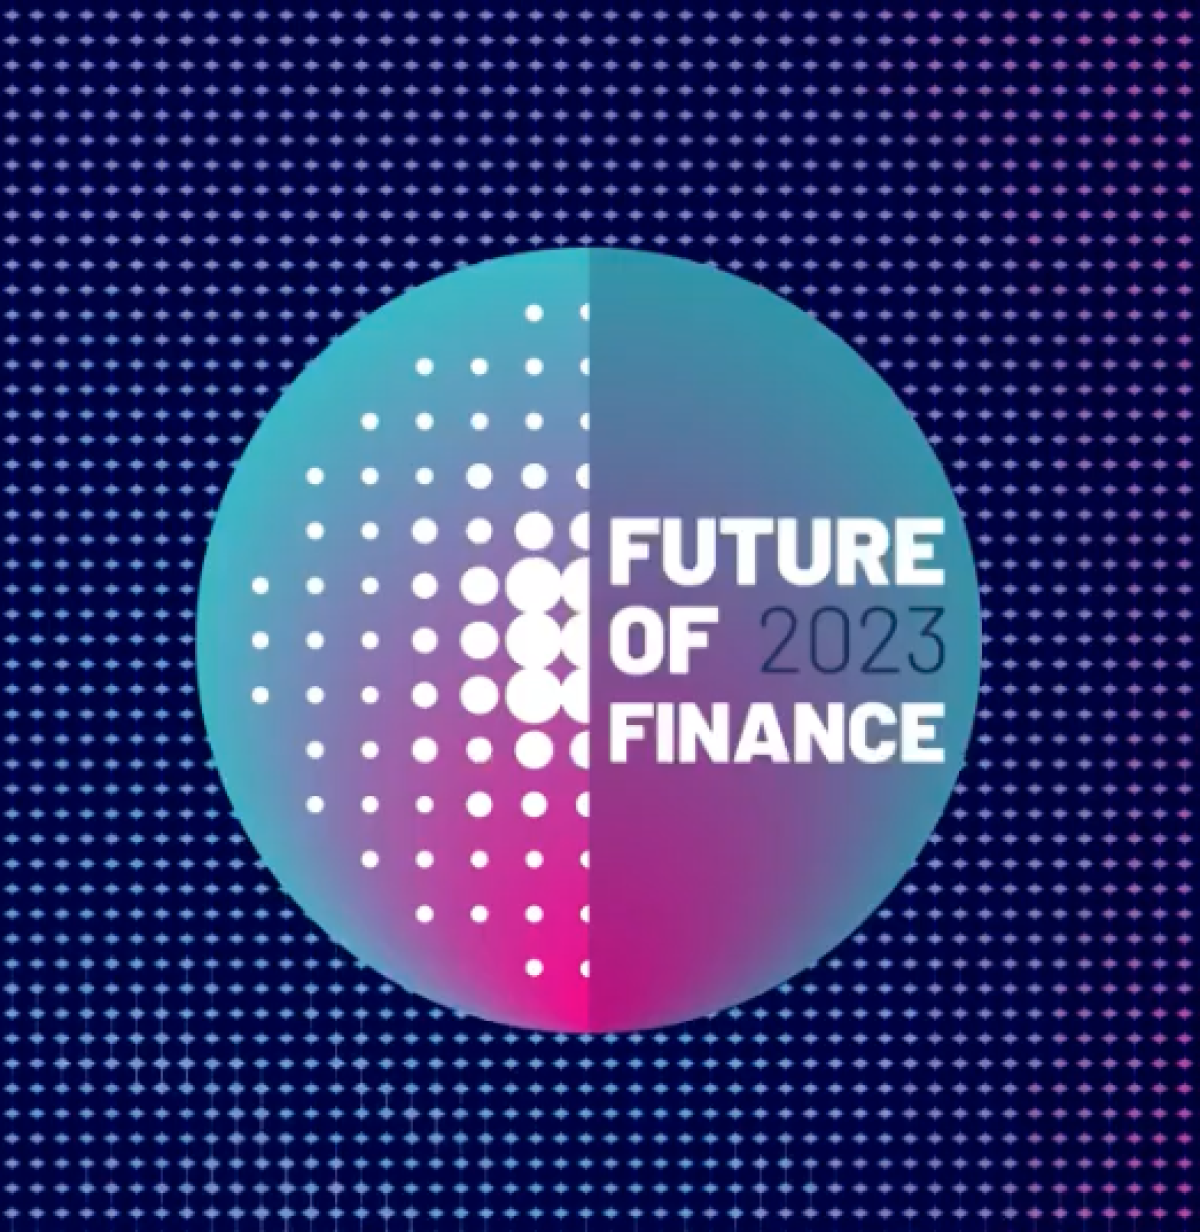 UNSGSA Queen Máxima to Conduct Fireside Chat at FMO’s Future of Finance